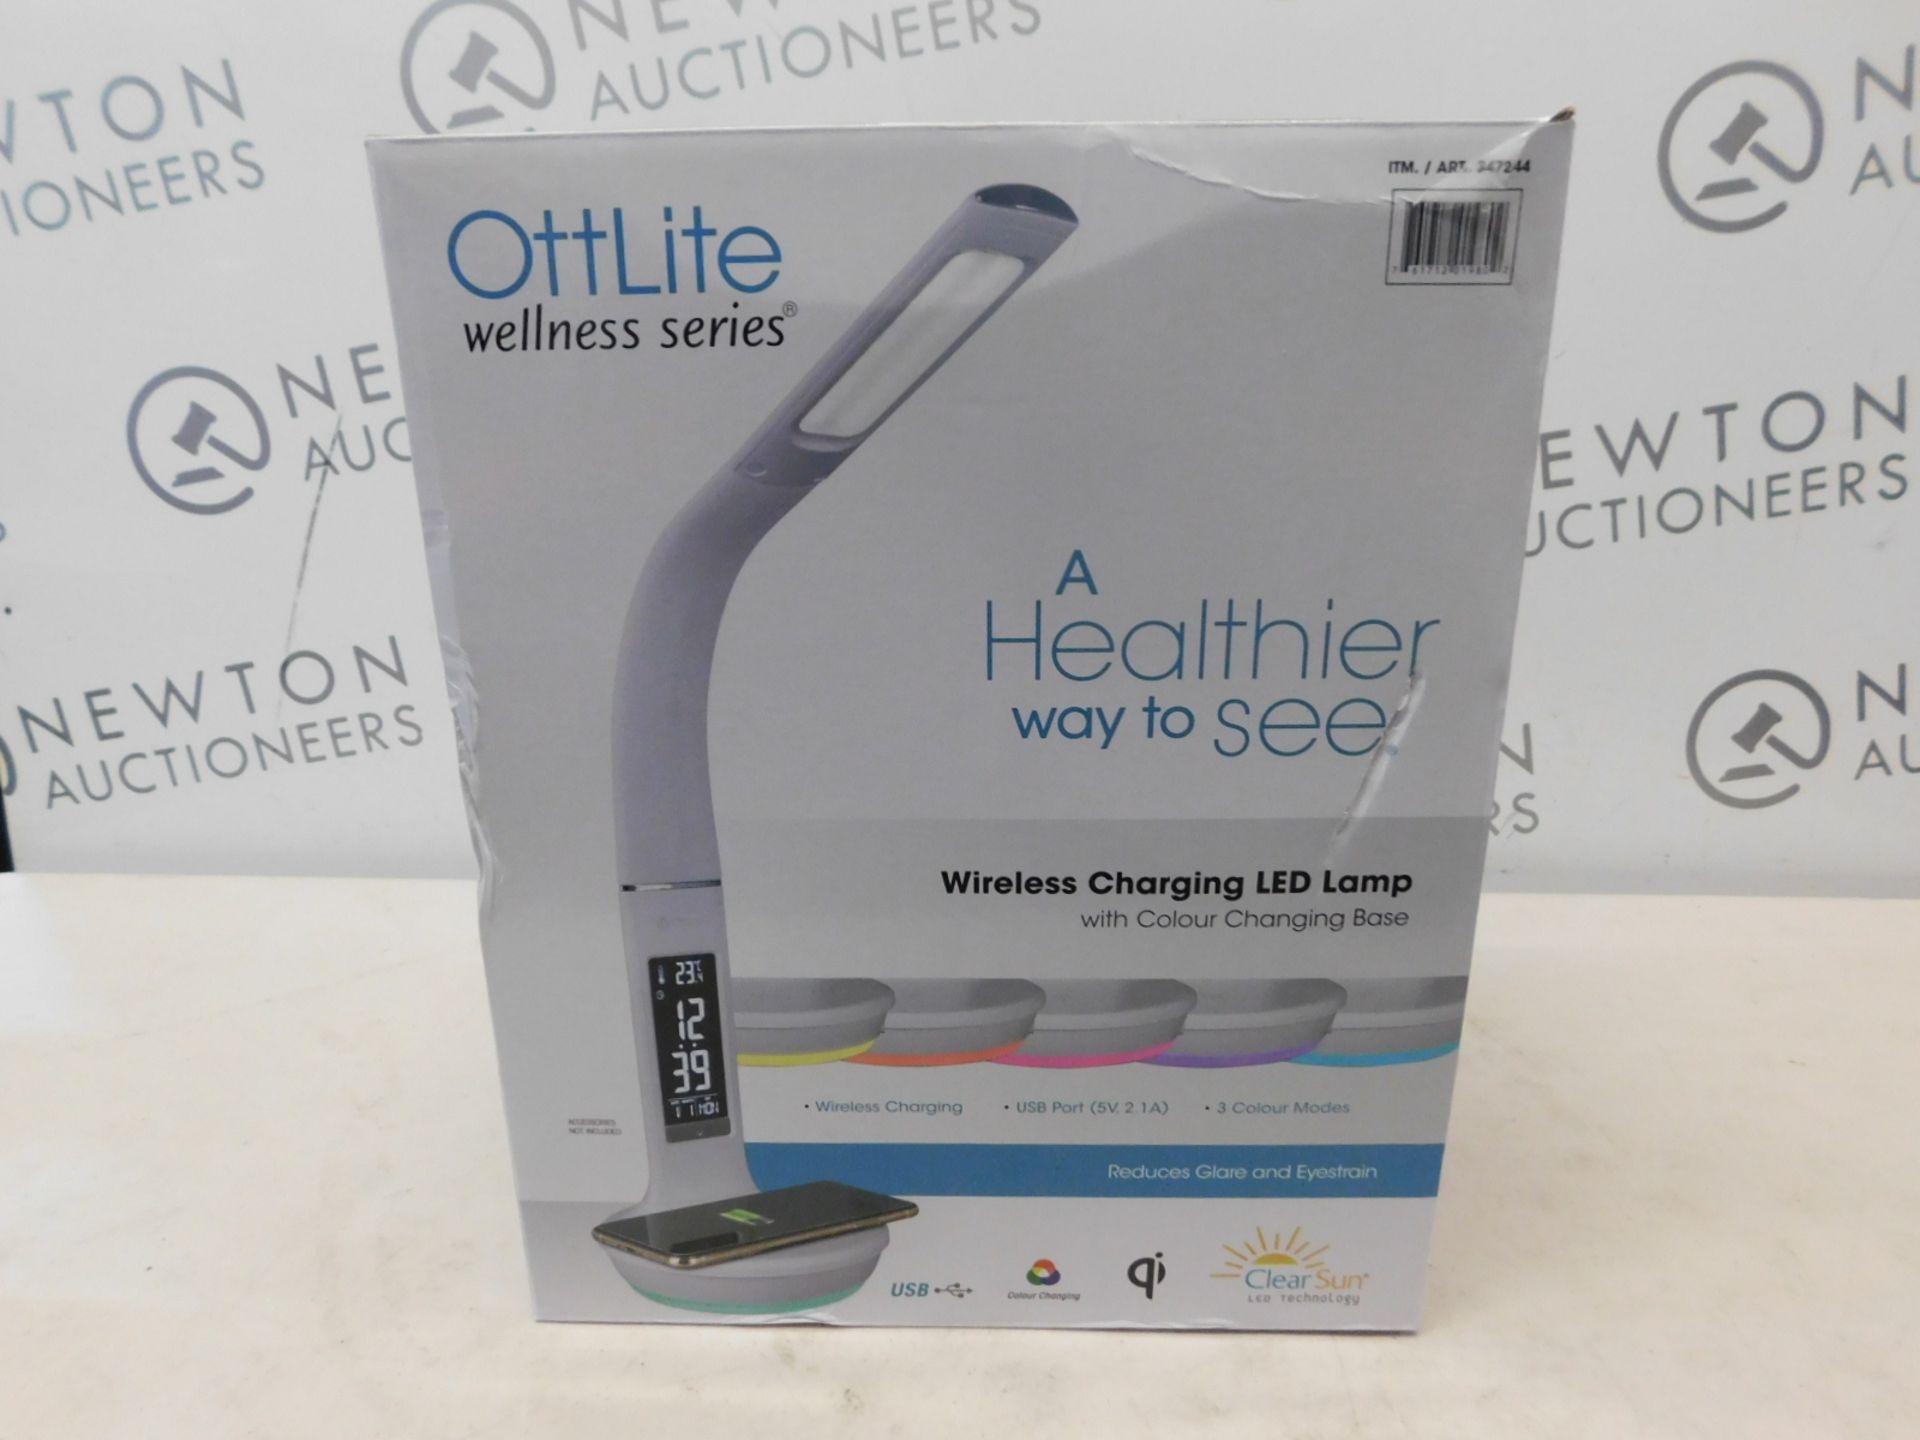 1 BOXED OTTLITE EXECUTIVE LED DESK LAMP WITH WIRELESS CHARGING RRP Â£49.99